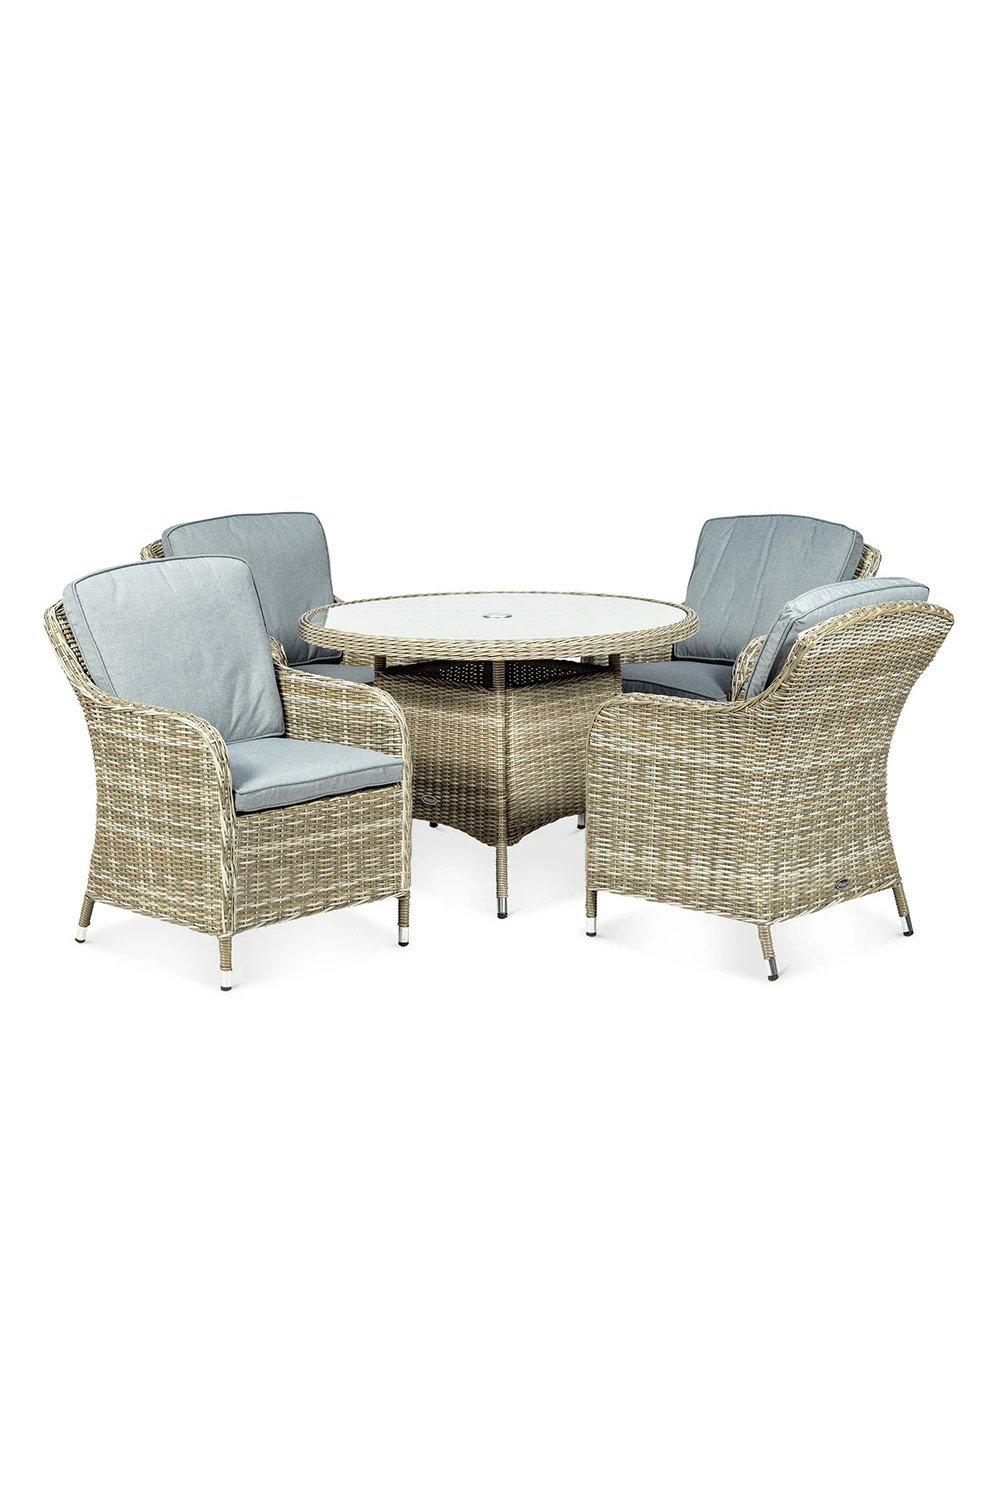 WENTWORTH 4 Seater Round Imperial Dining Set